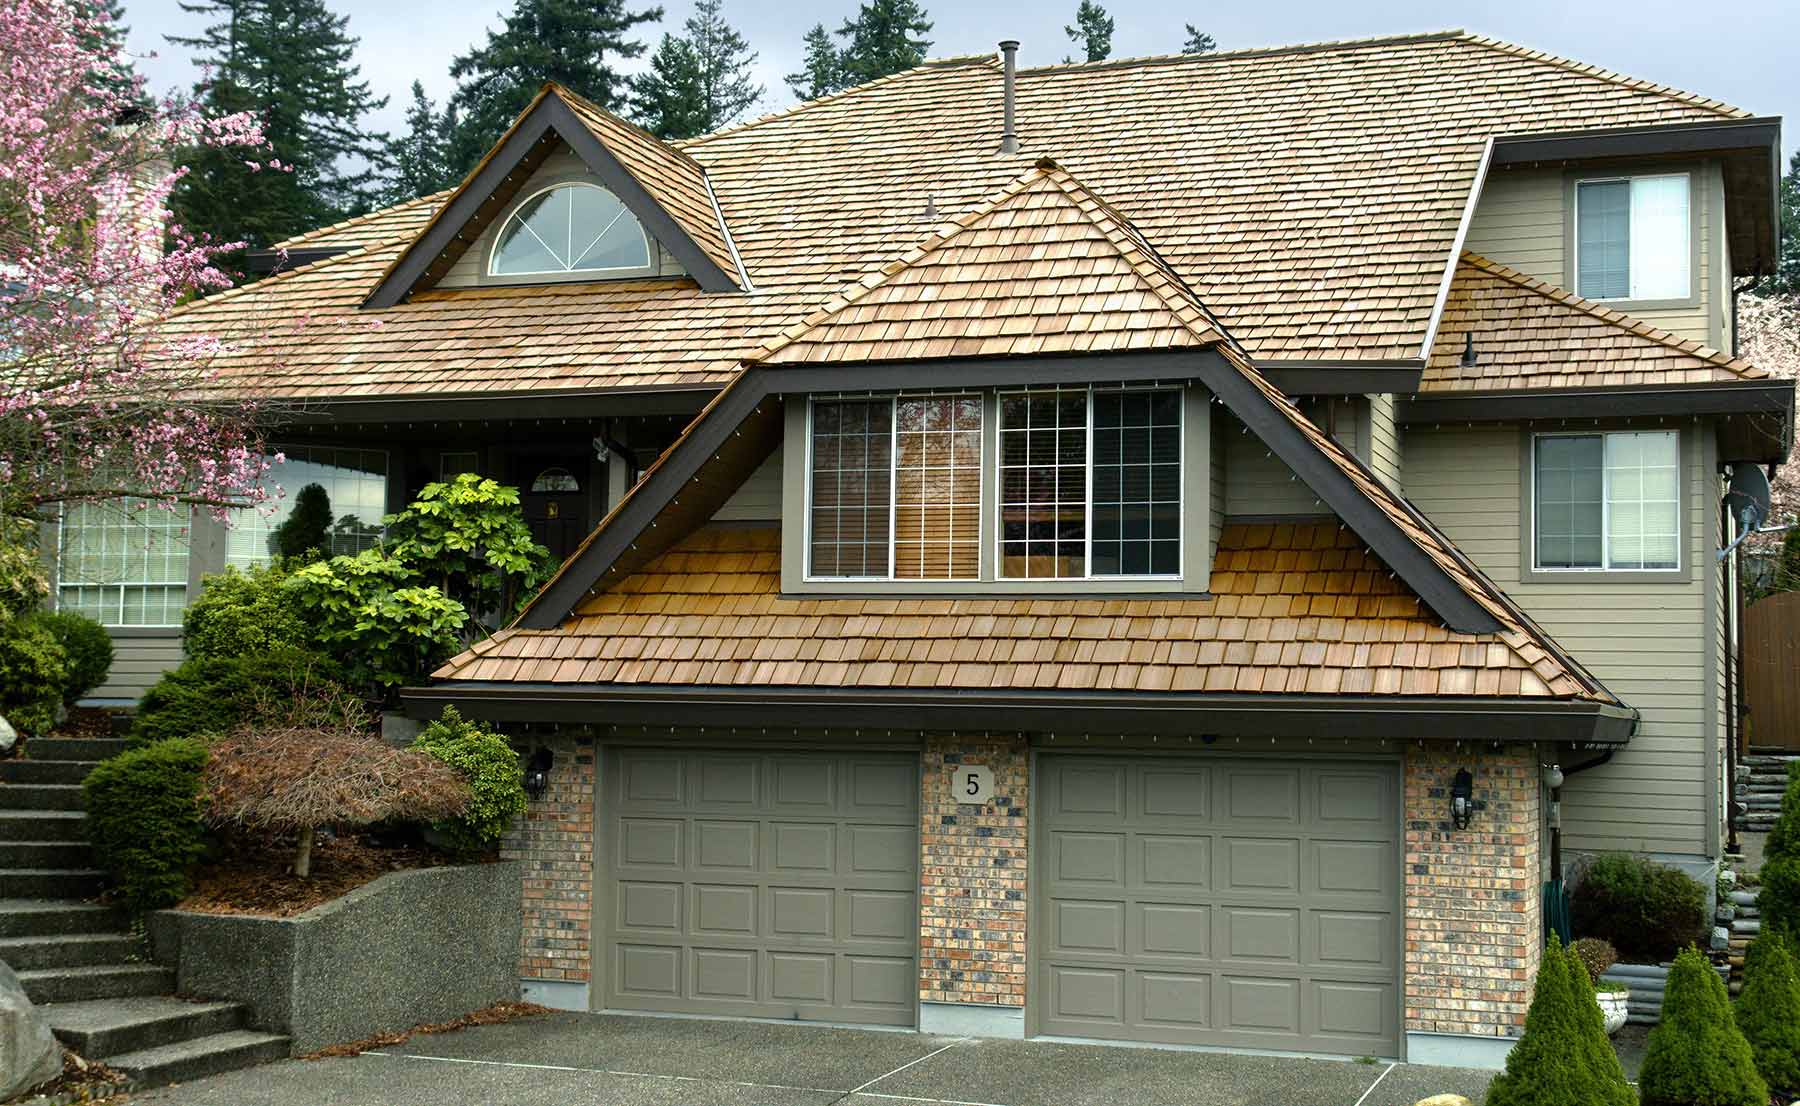 Learn About Cedar Shakes And Cedar Shingles Roofing Materials